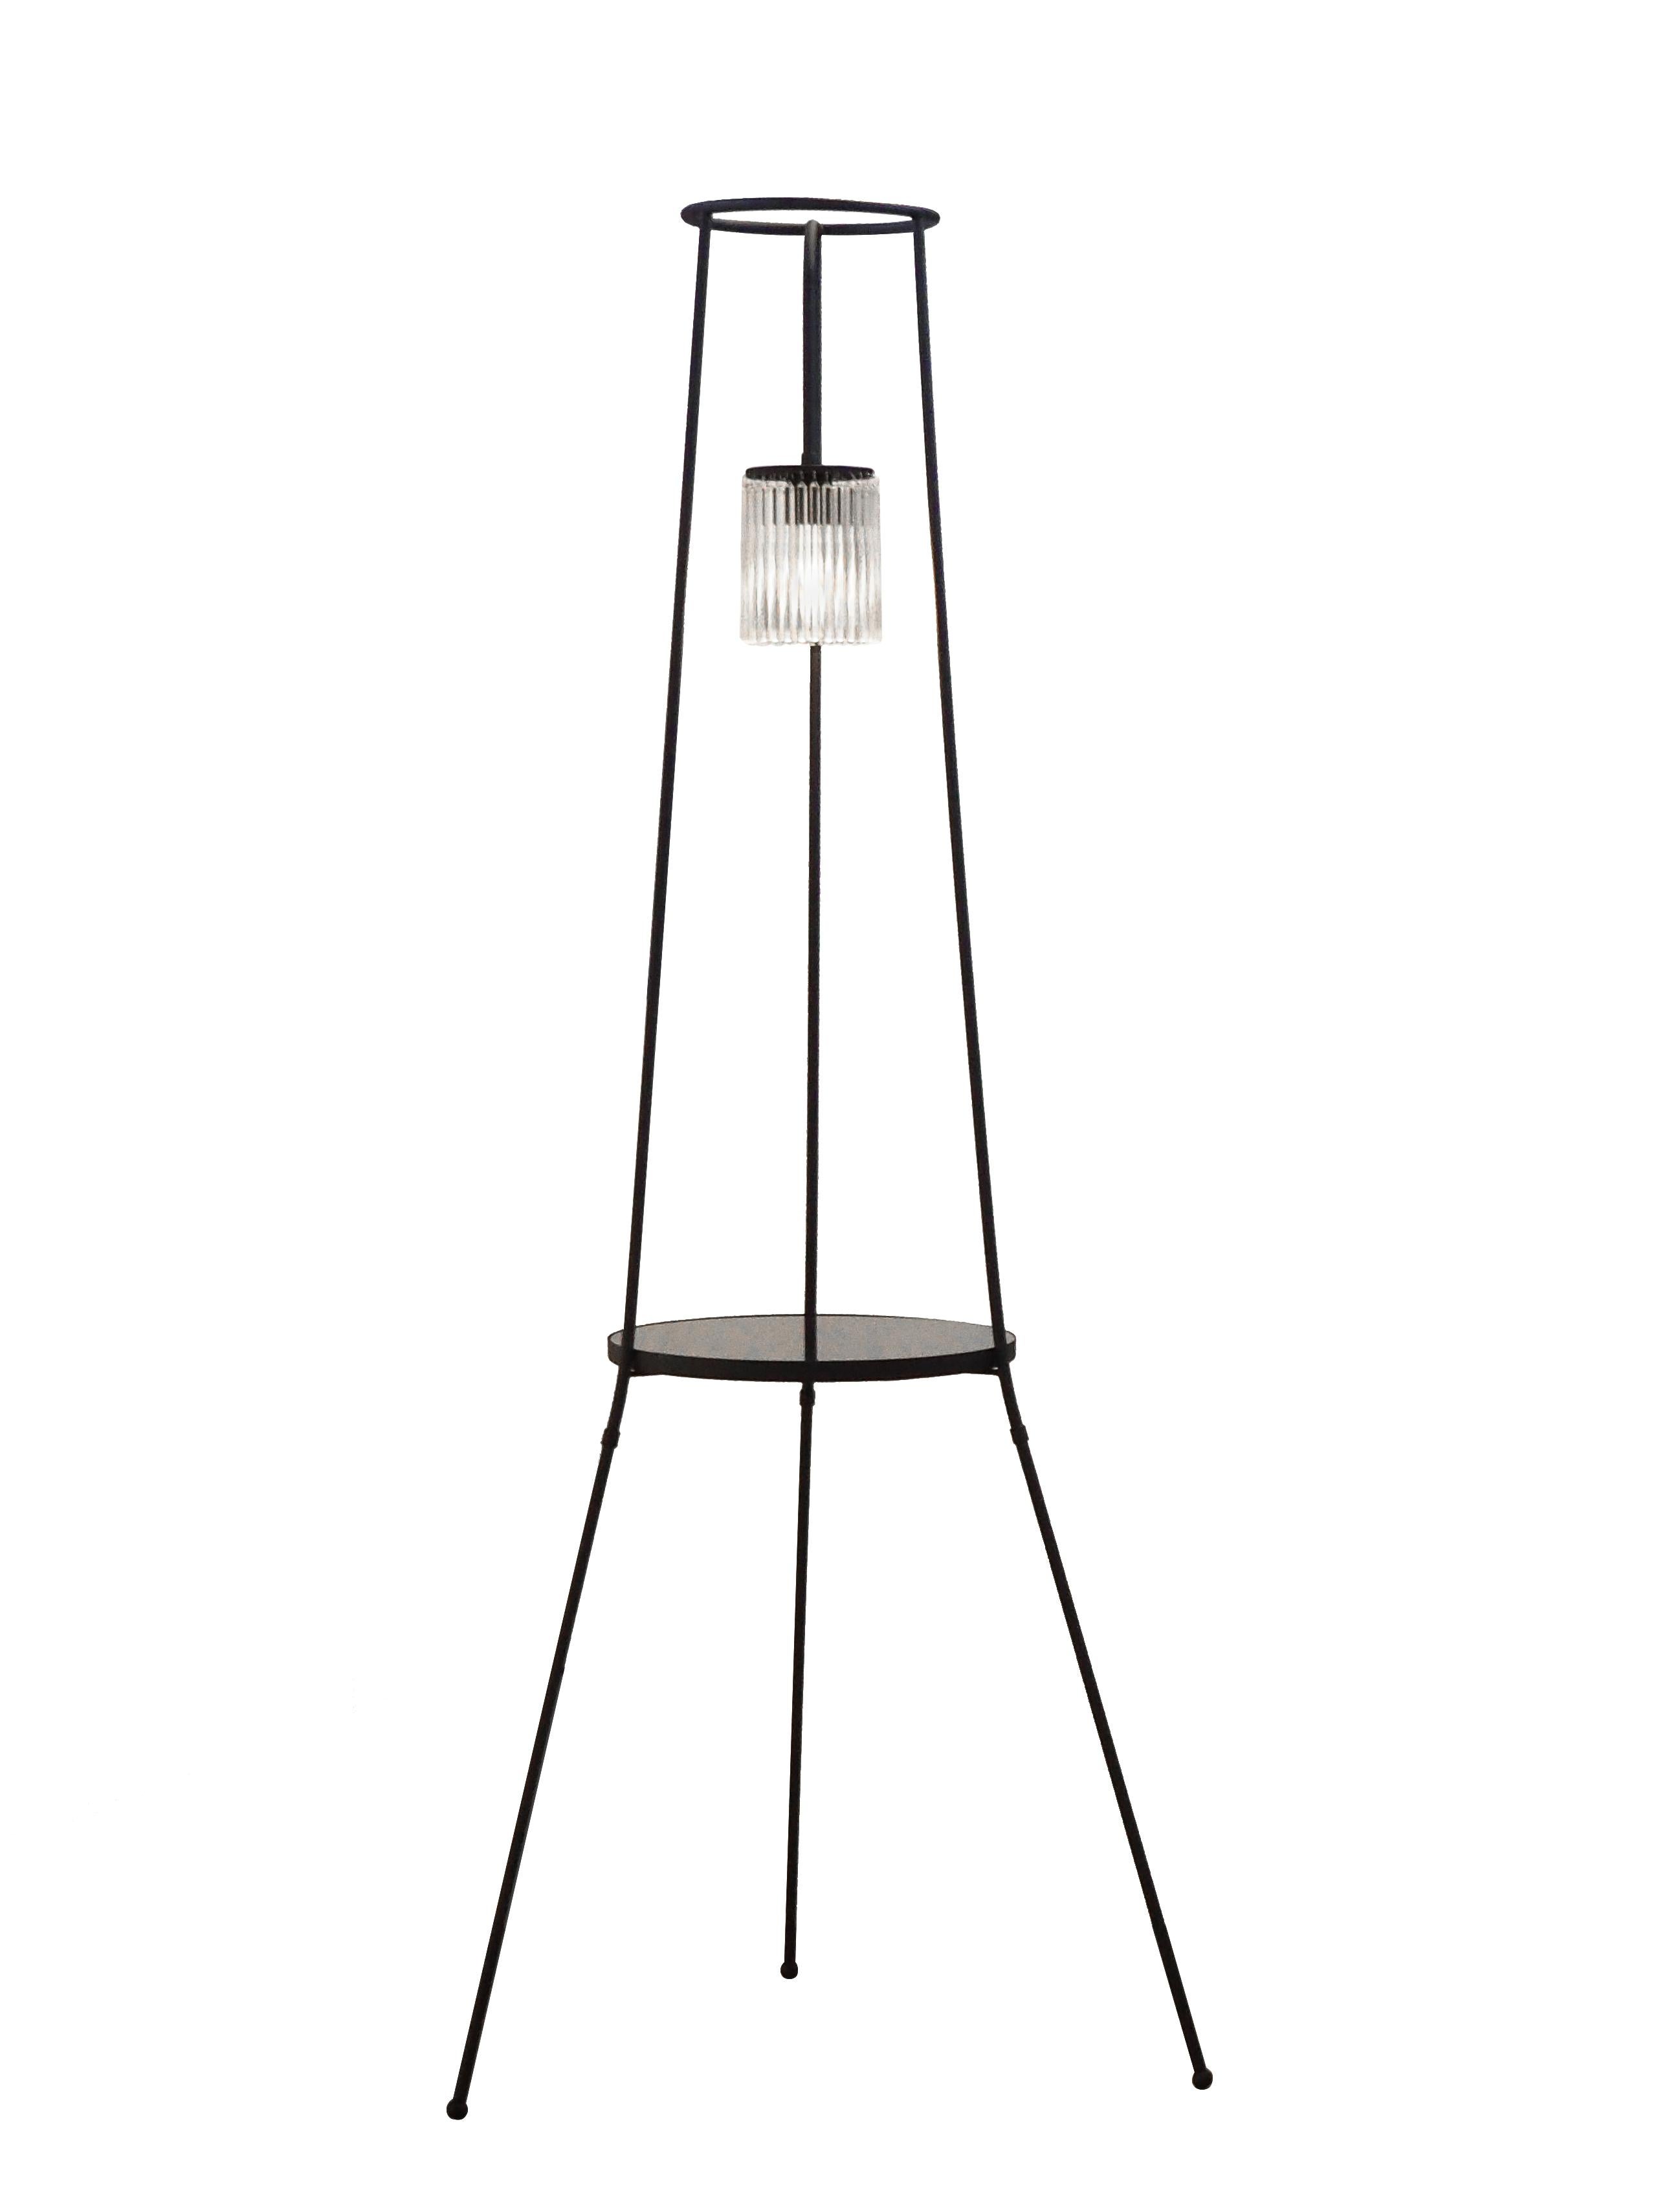 Coda floor lamp by Studio Laf
Dimensions: W 70 x H 185 cm
Materials: Metal, Marble, Glass
All our lamps can be wired according to each country. If sold to the USA it will be wired for the USA for instance.


Coda designed for indoor use; is